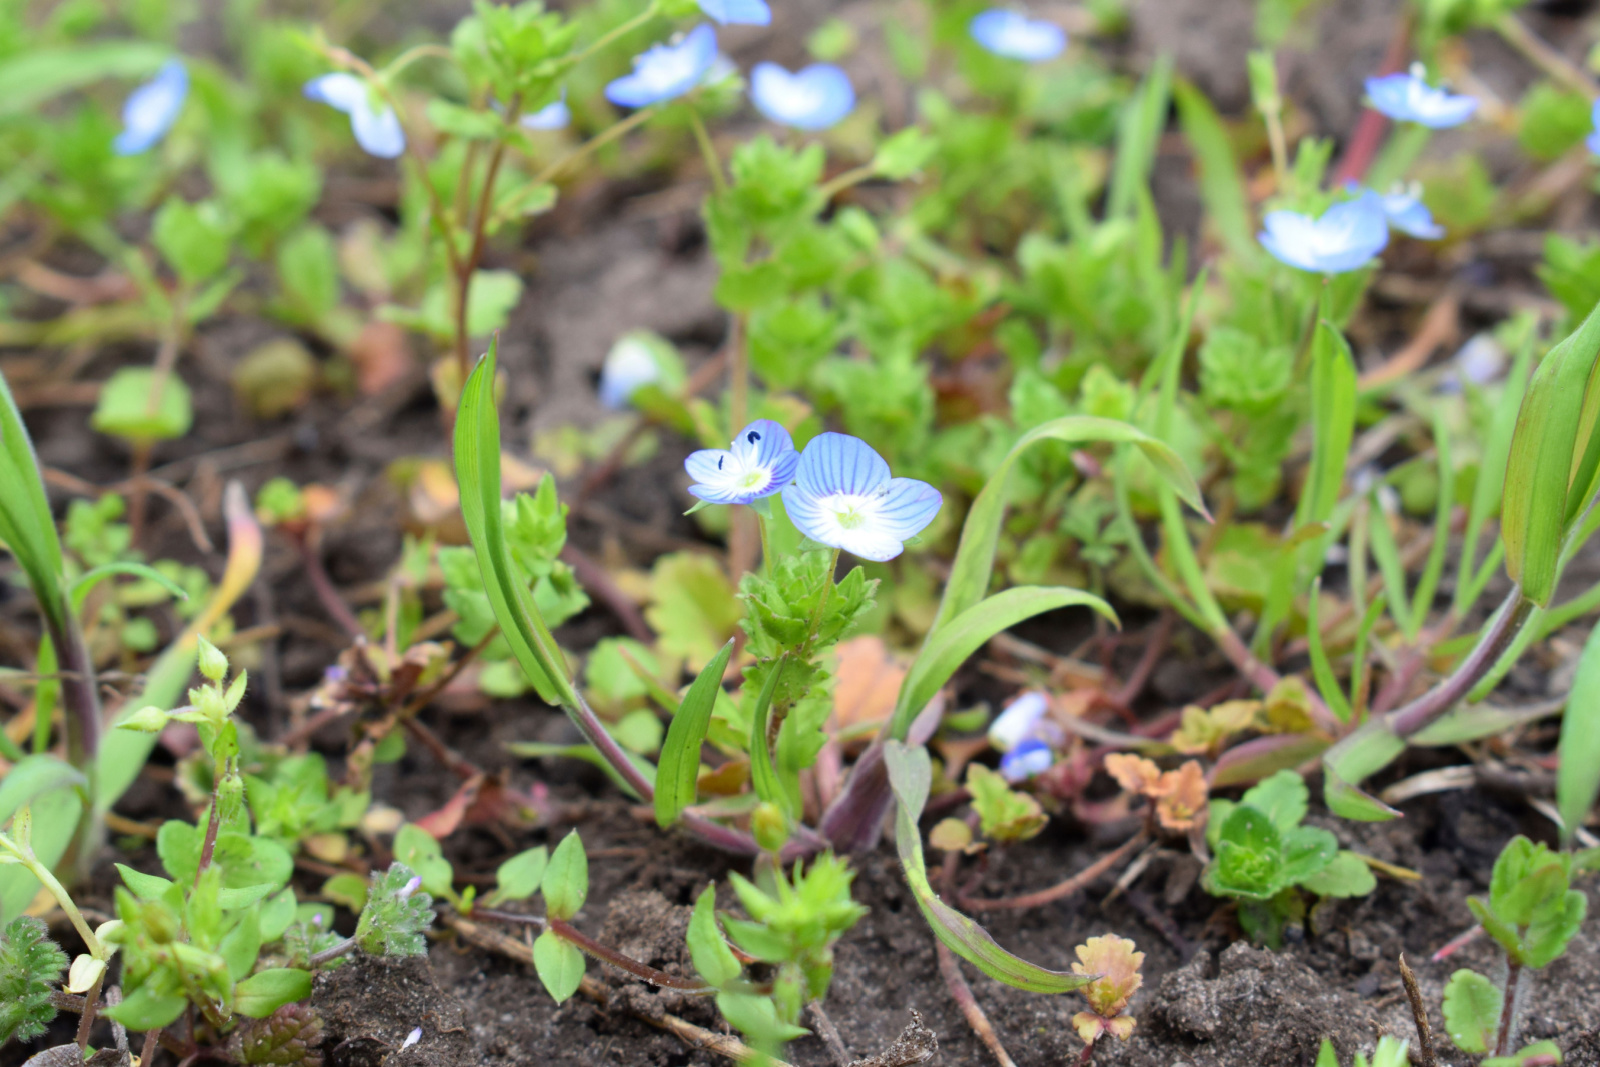 creeping speedwell or Veronica persica